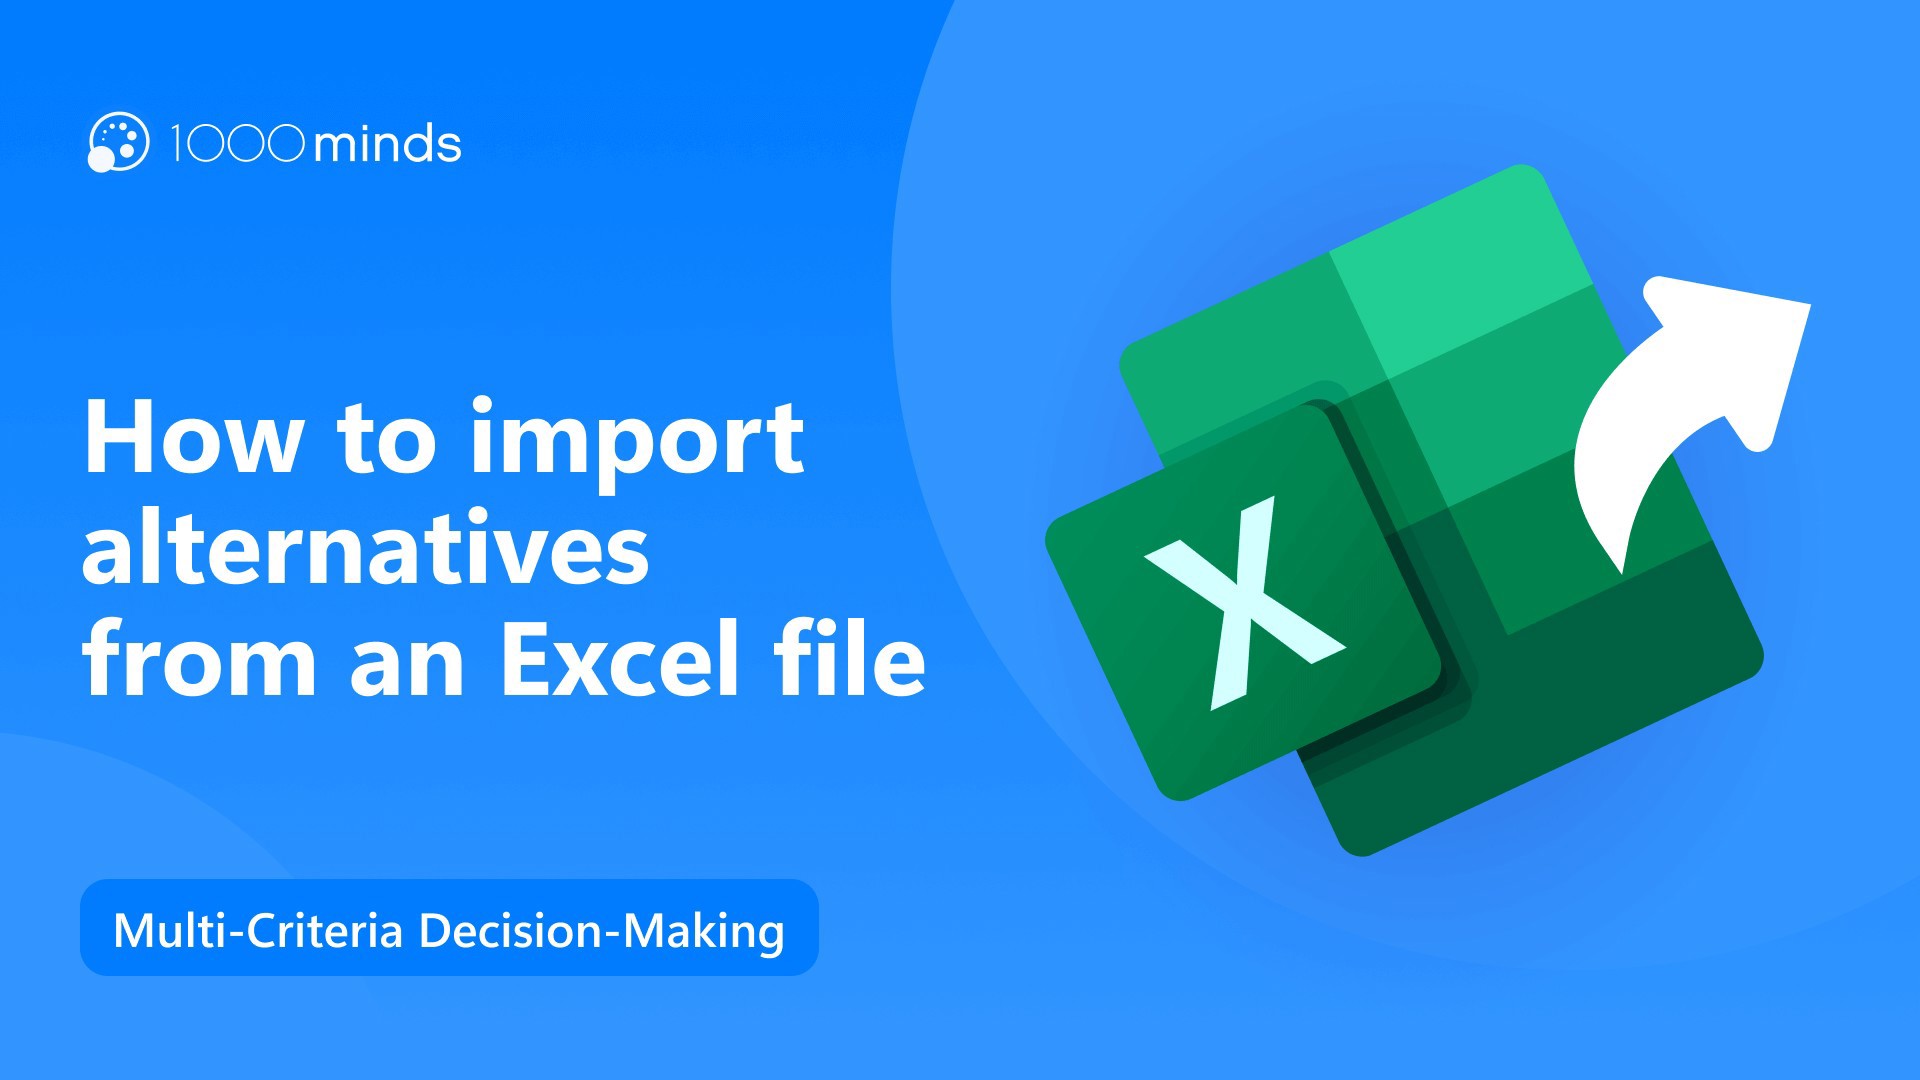 How to import alternatives from an Excel file